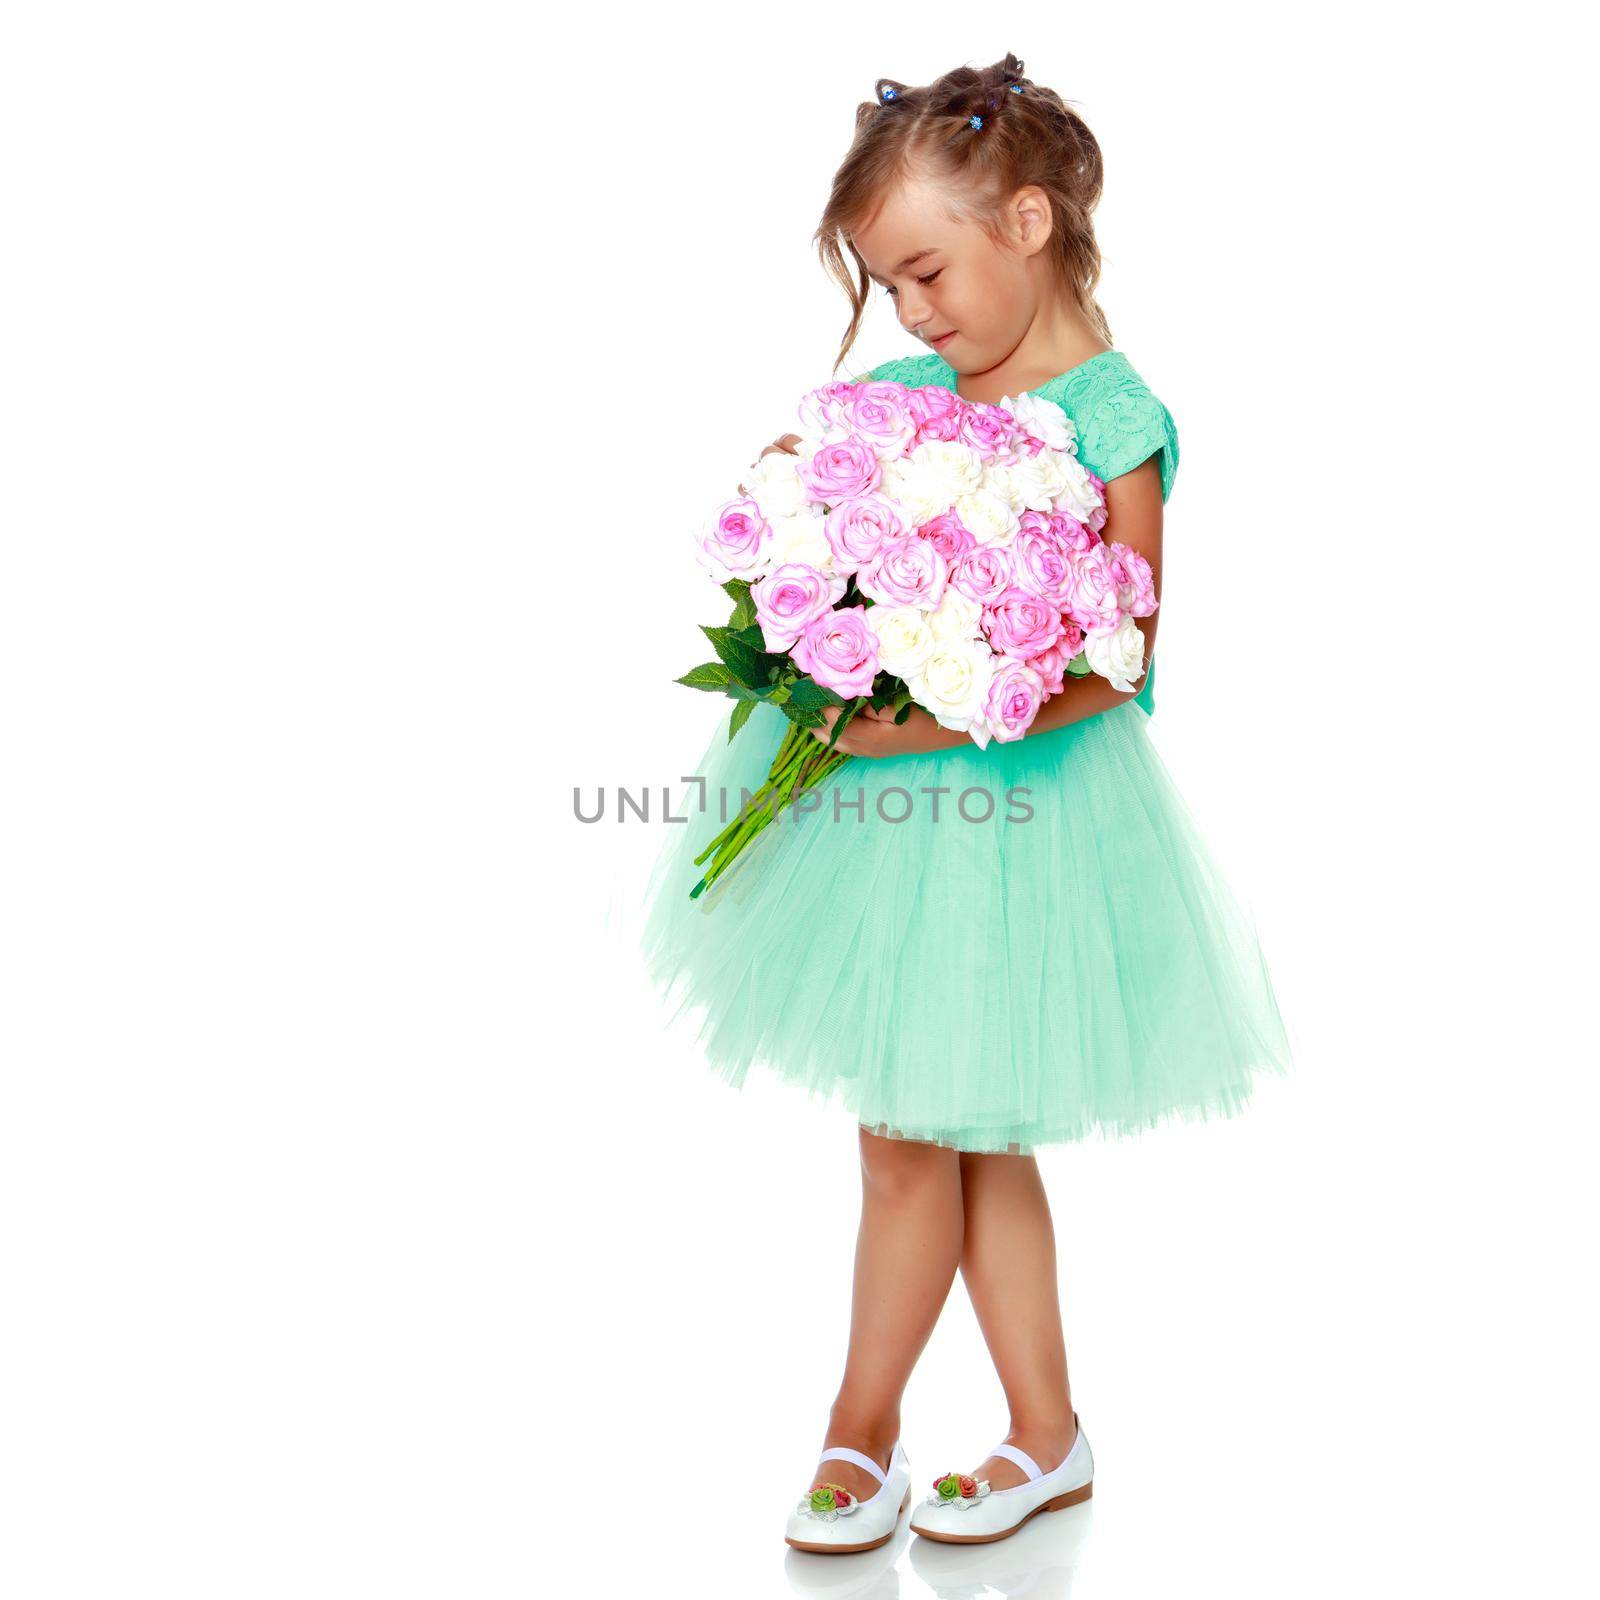 Little girl with a bouquet of flowers by kolesnikov_studio